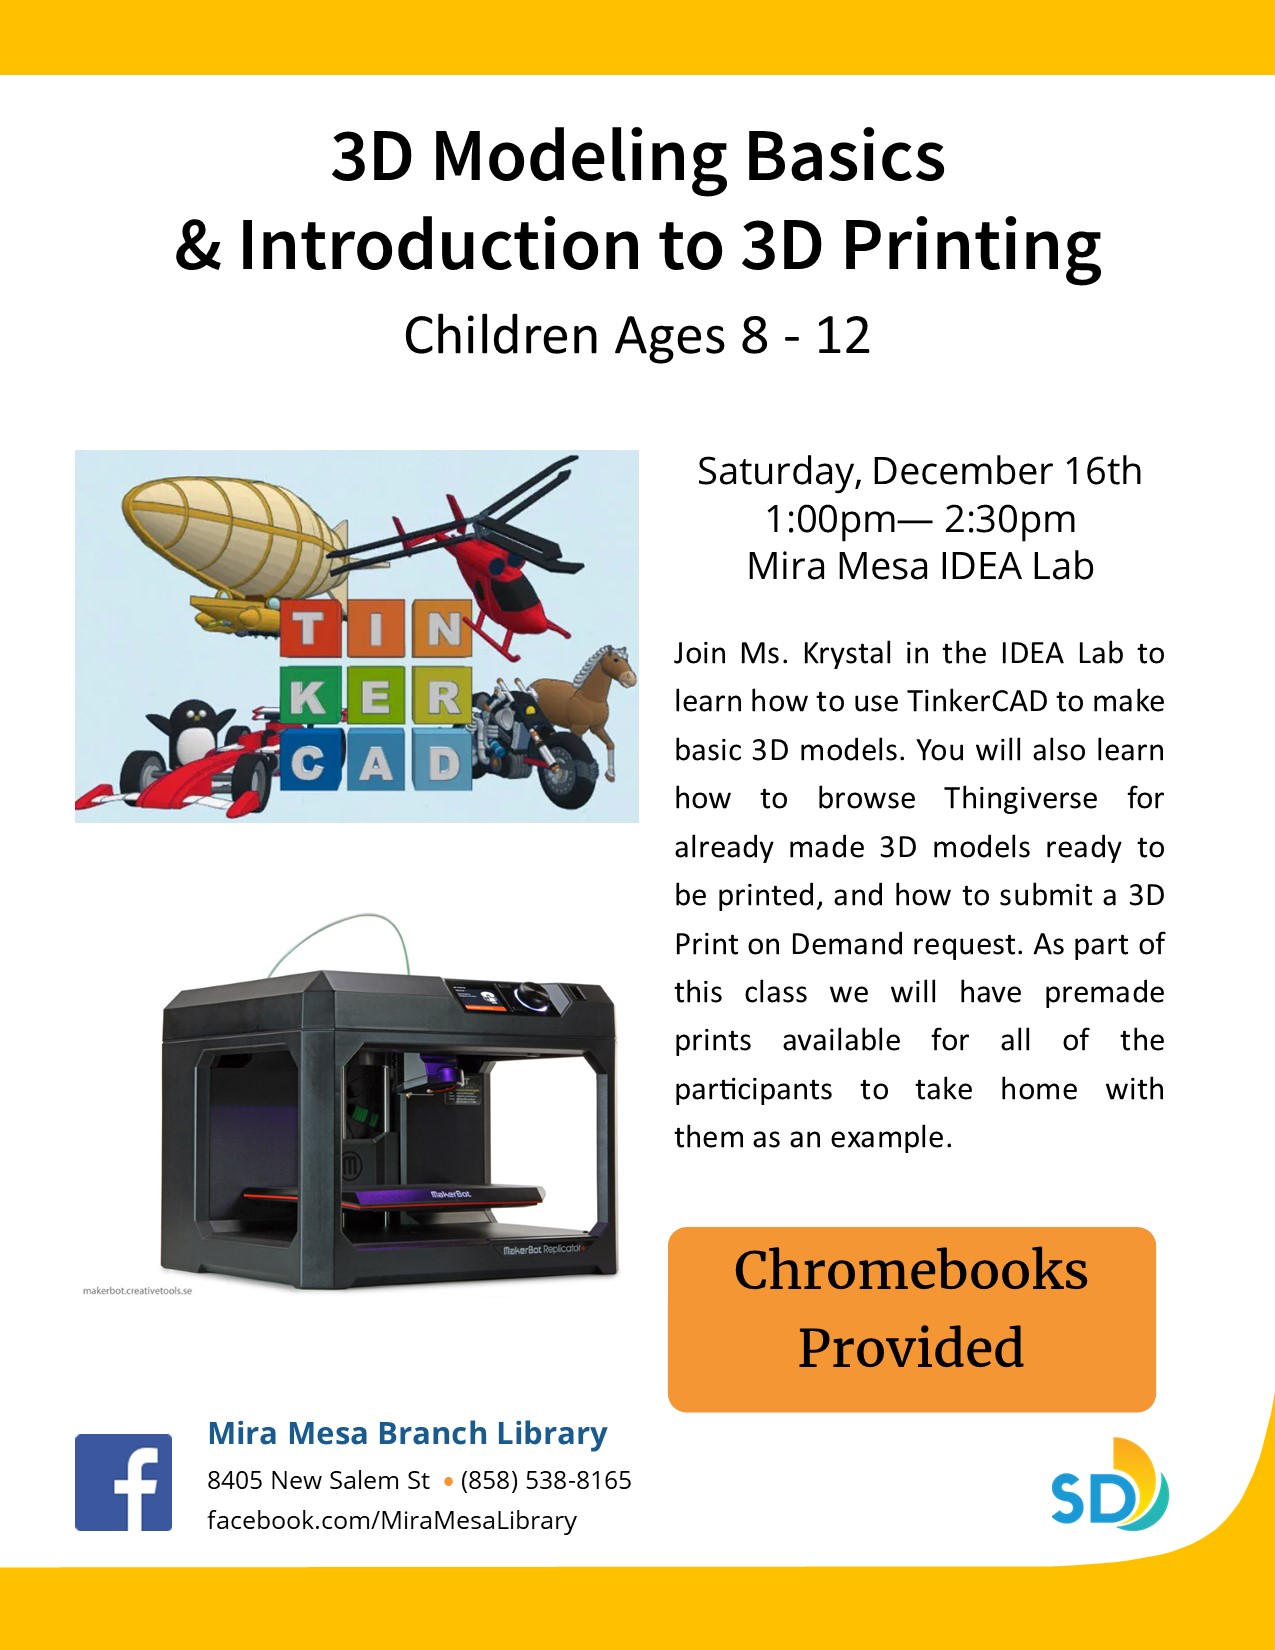 3D printer and colorful images of horse, motorcycle, airship, penguins and blocks that spell Tinkercad